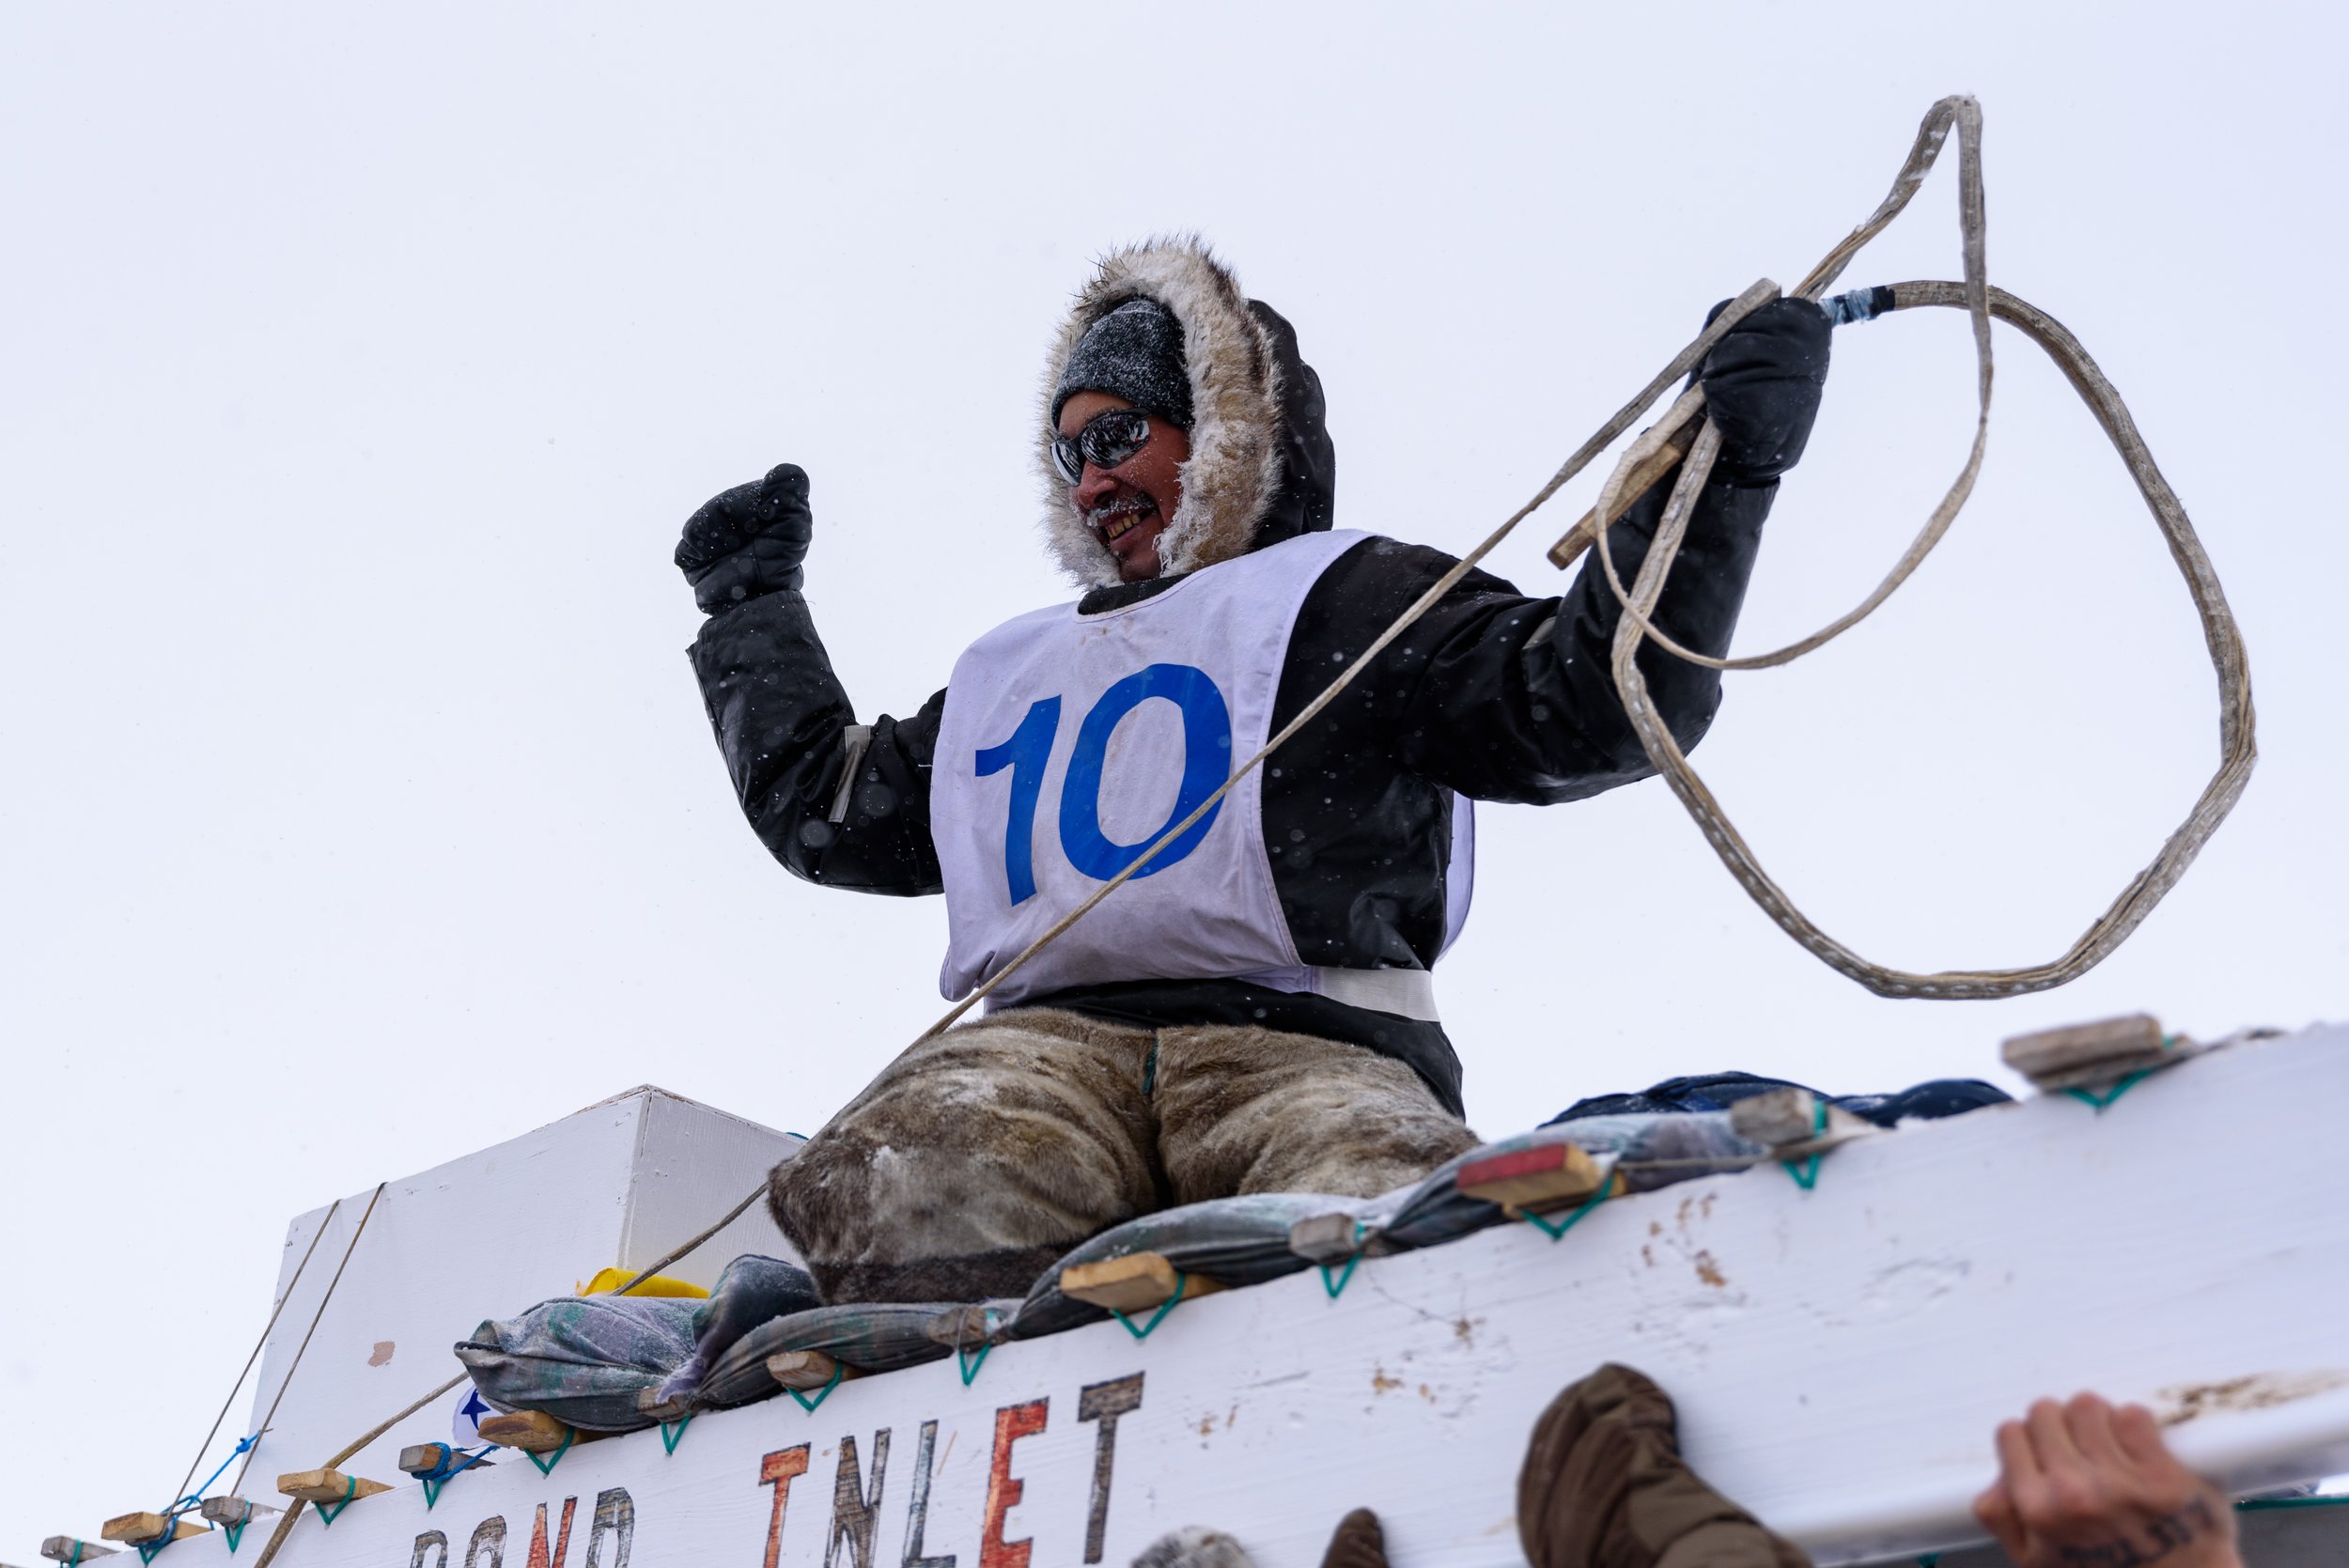  Lee Inuarak, of Pond Inlet, is hoisted into the air after being first to cross the finish line of the NunavutQuest in Igloolik, Nunavut on Wednesday, April 27, 2022. The winner of the quest will be announced during an award ceremony on April 28. Sho